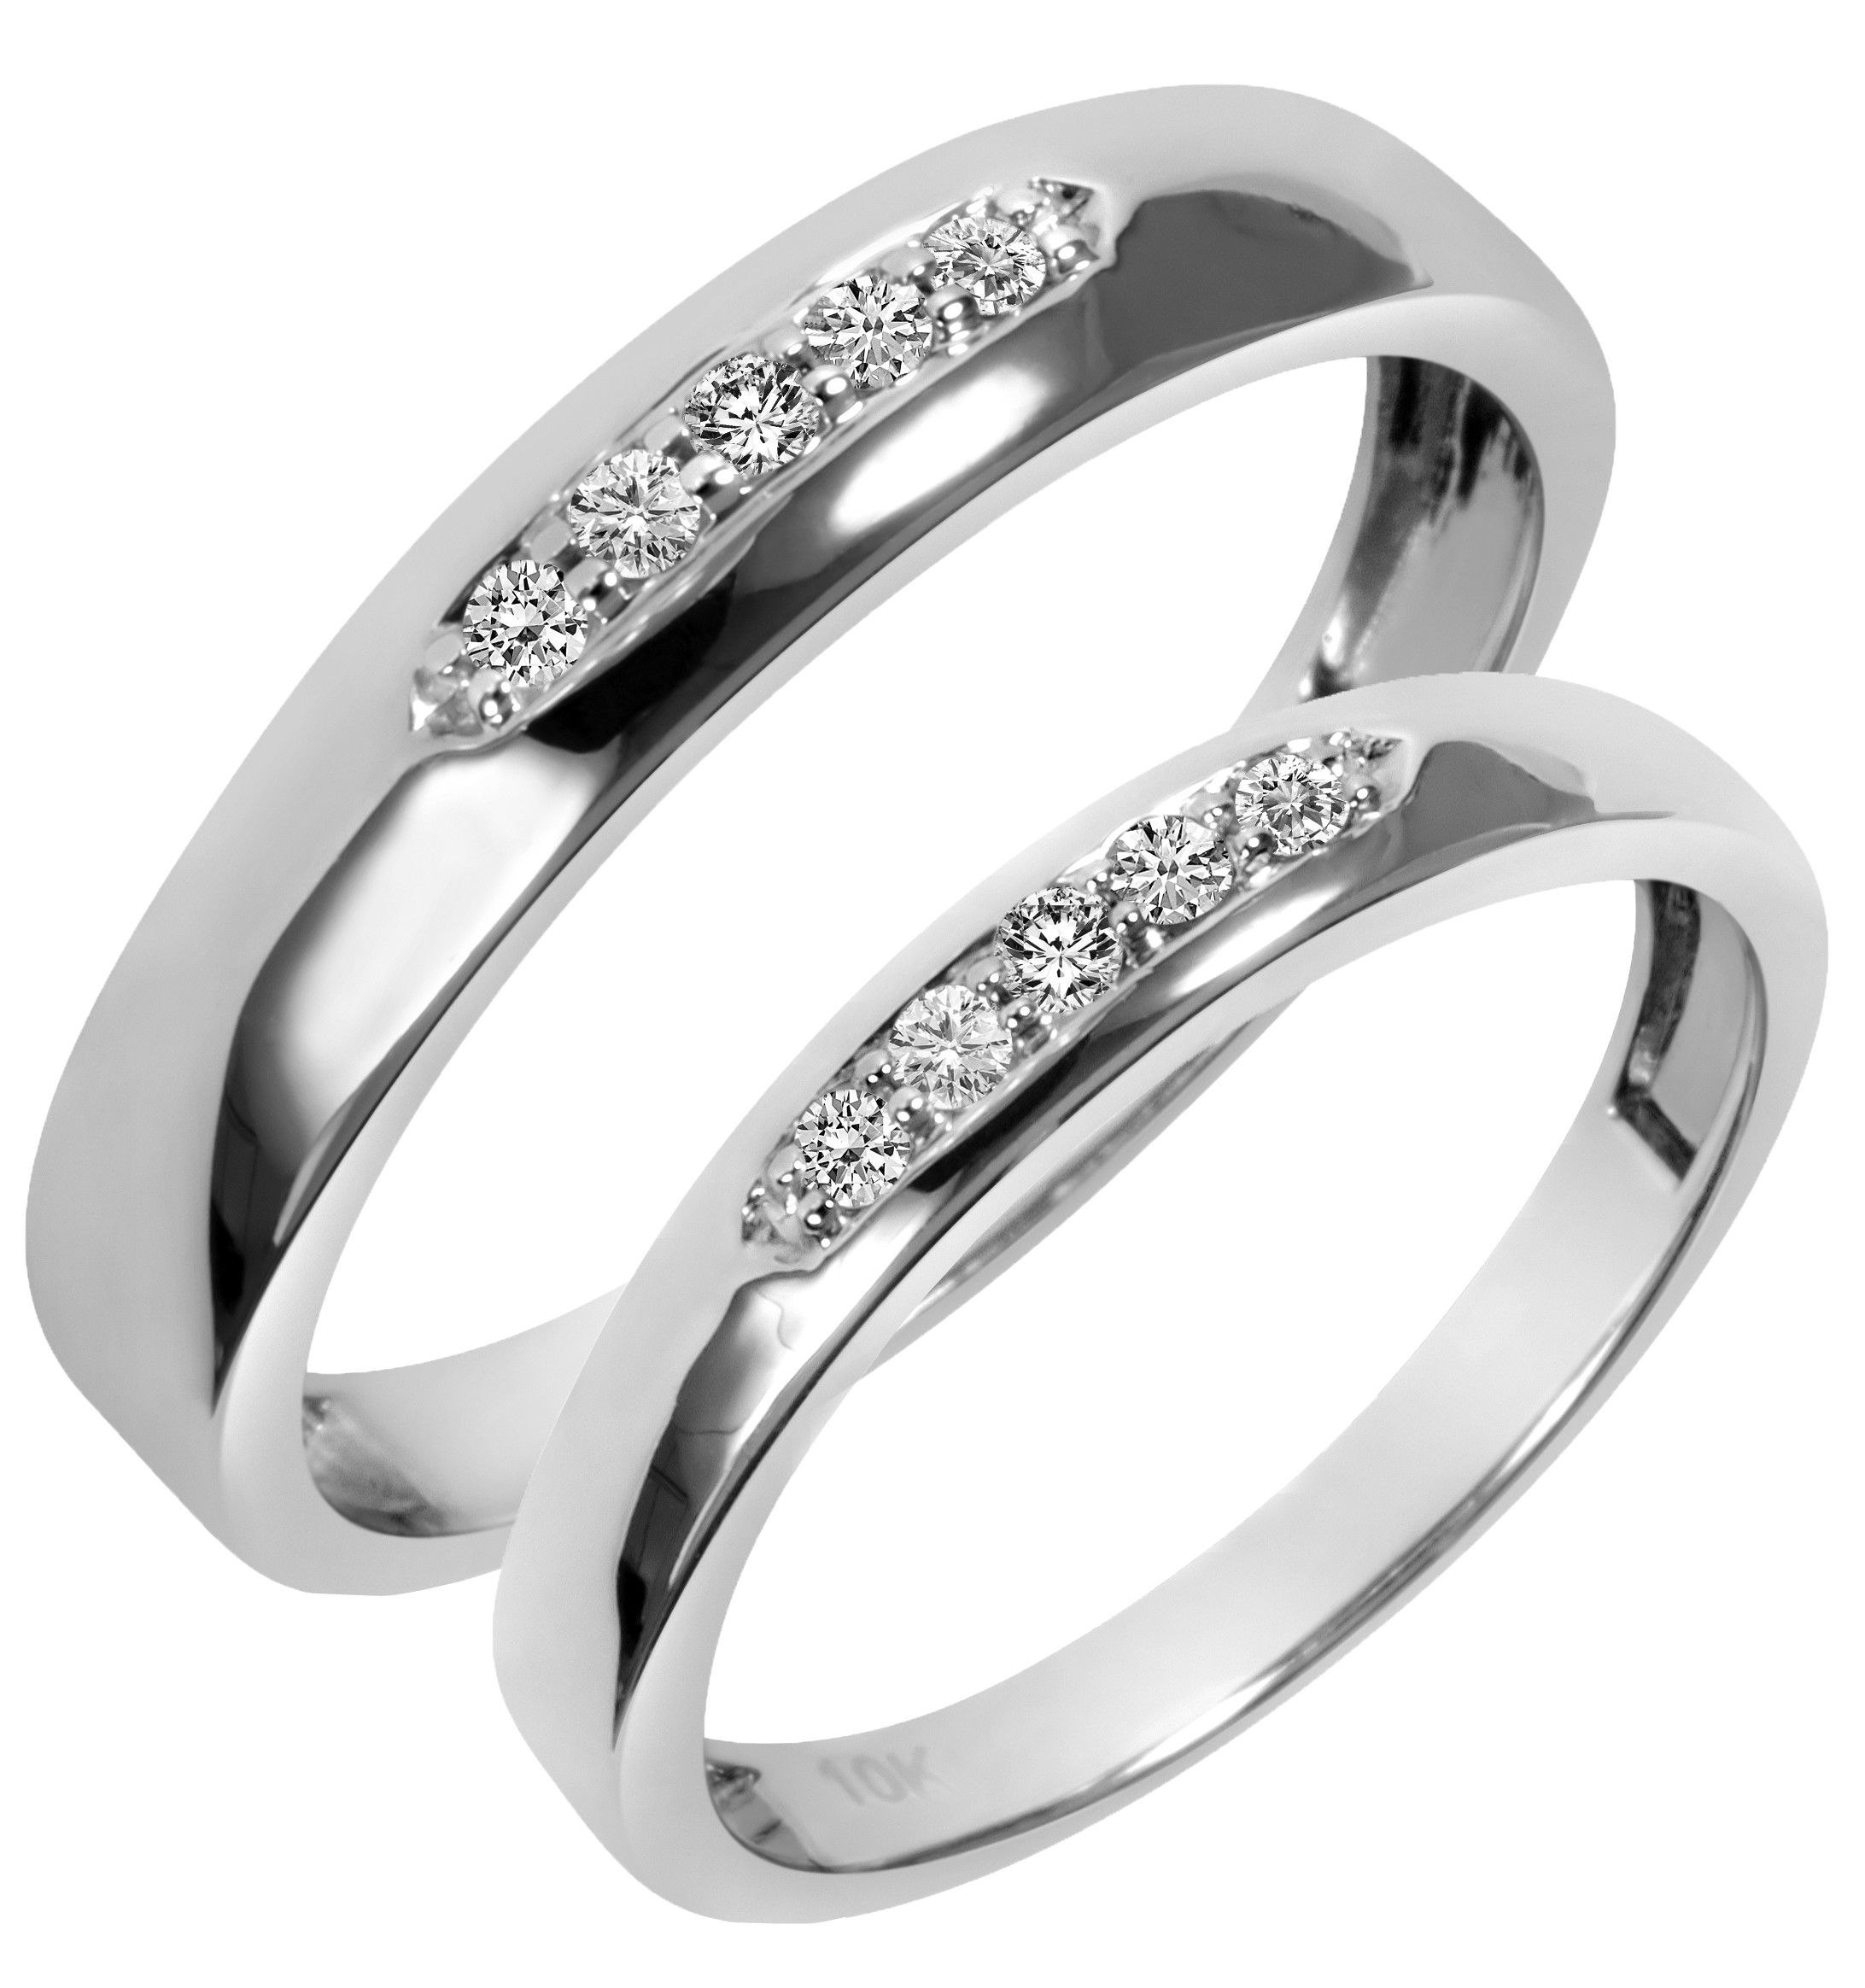 Wedding Ring Sets His And Hers
 10K White Gold 1 5 CT T W